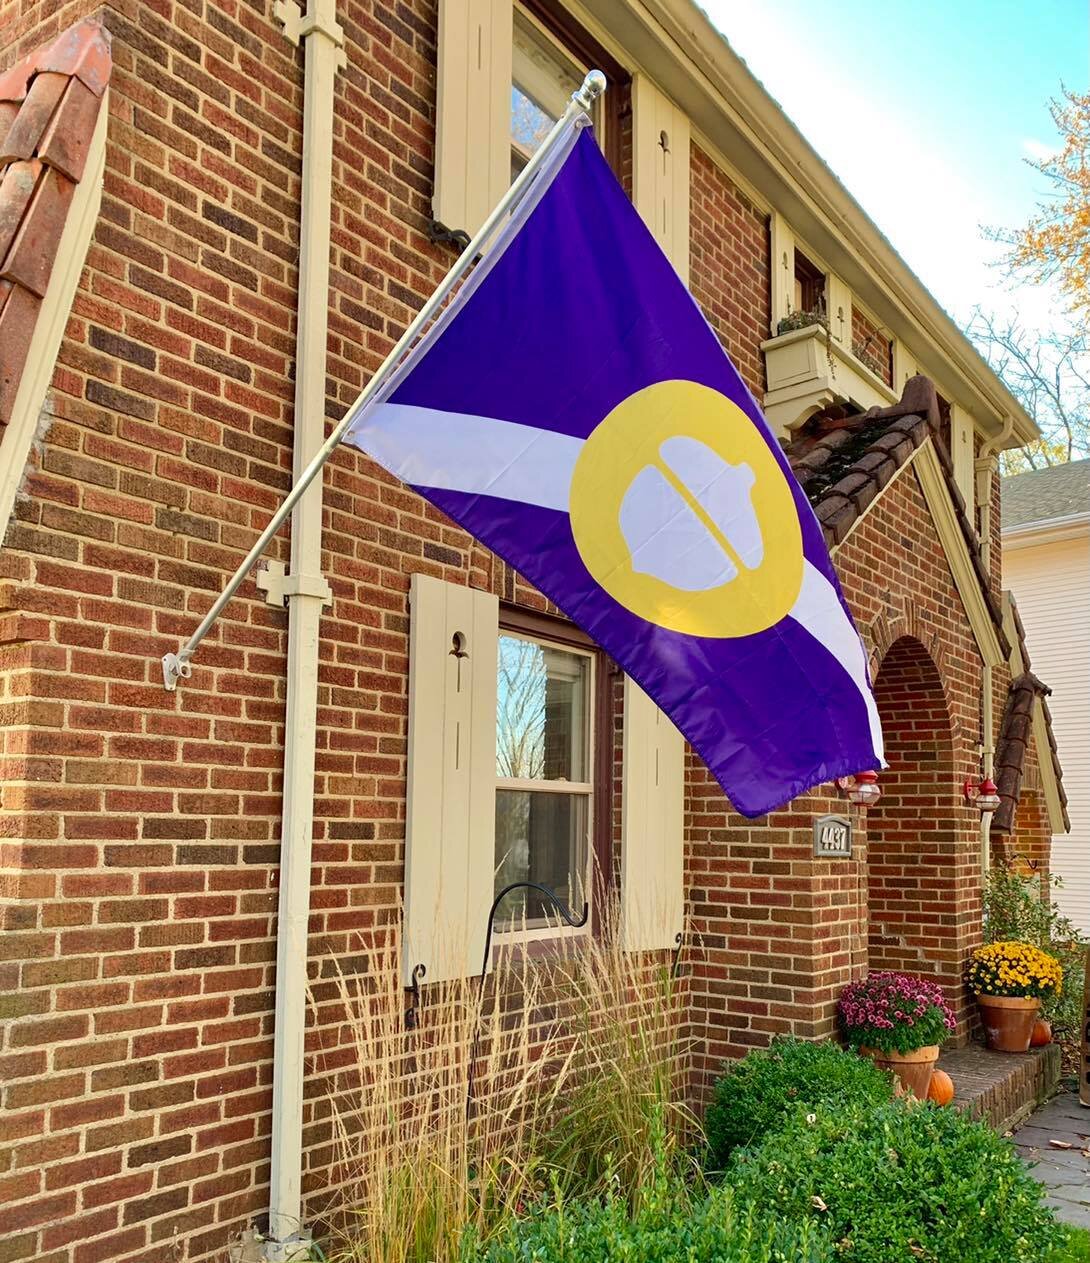 The Historic Southwood Park flag hangs proudly on neighbors' homes. Flags can be ordered online for $20.